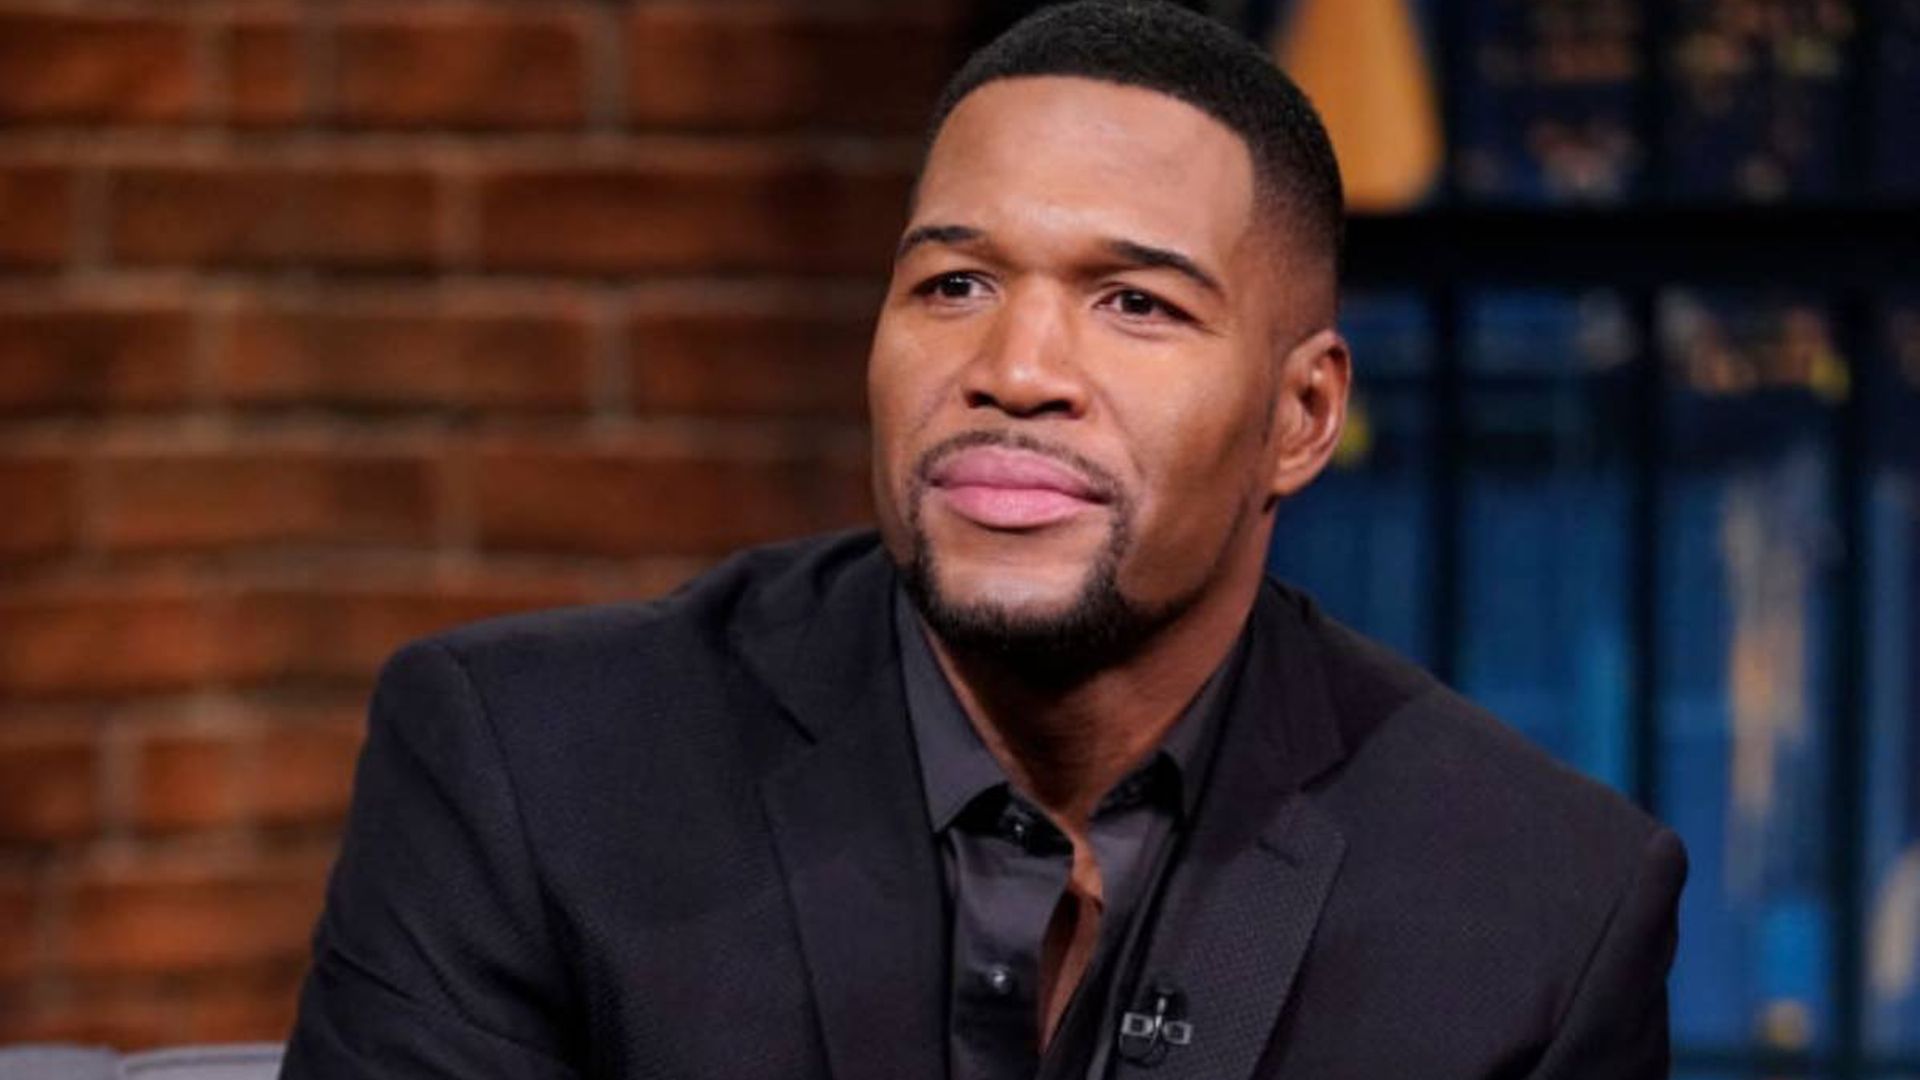 Michael Strahan receives overwhelming support following proud news about daughter